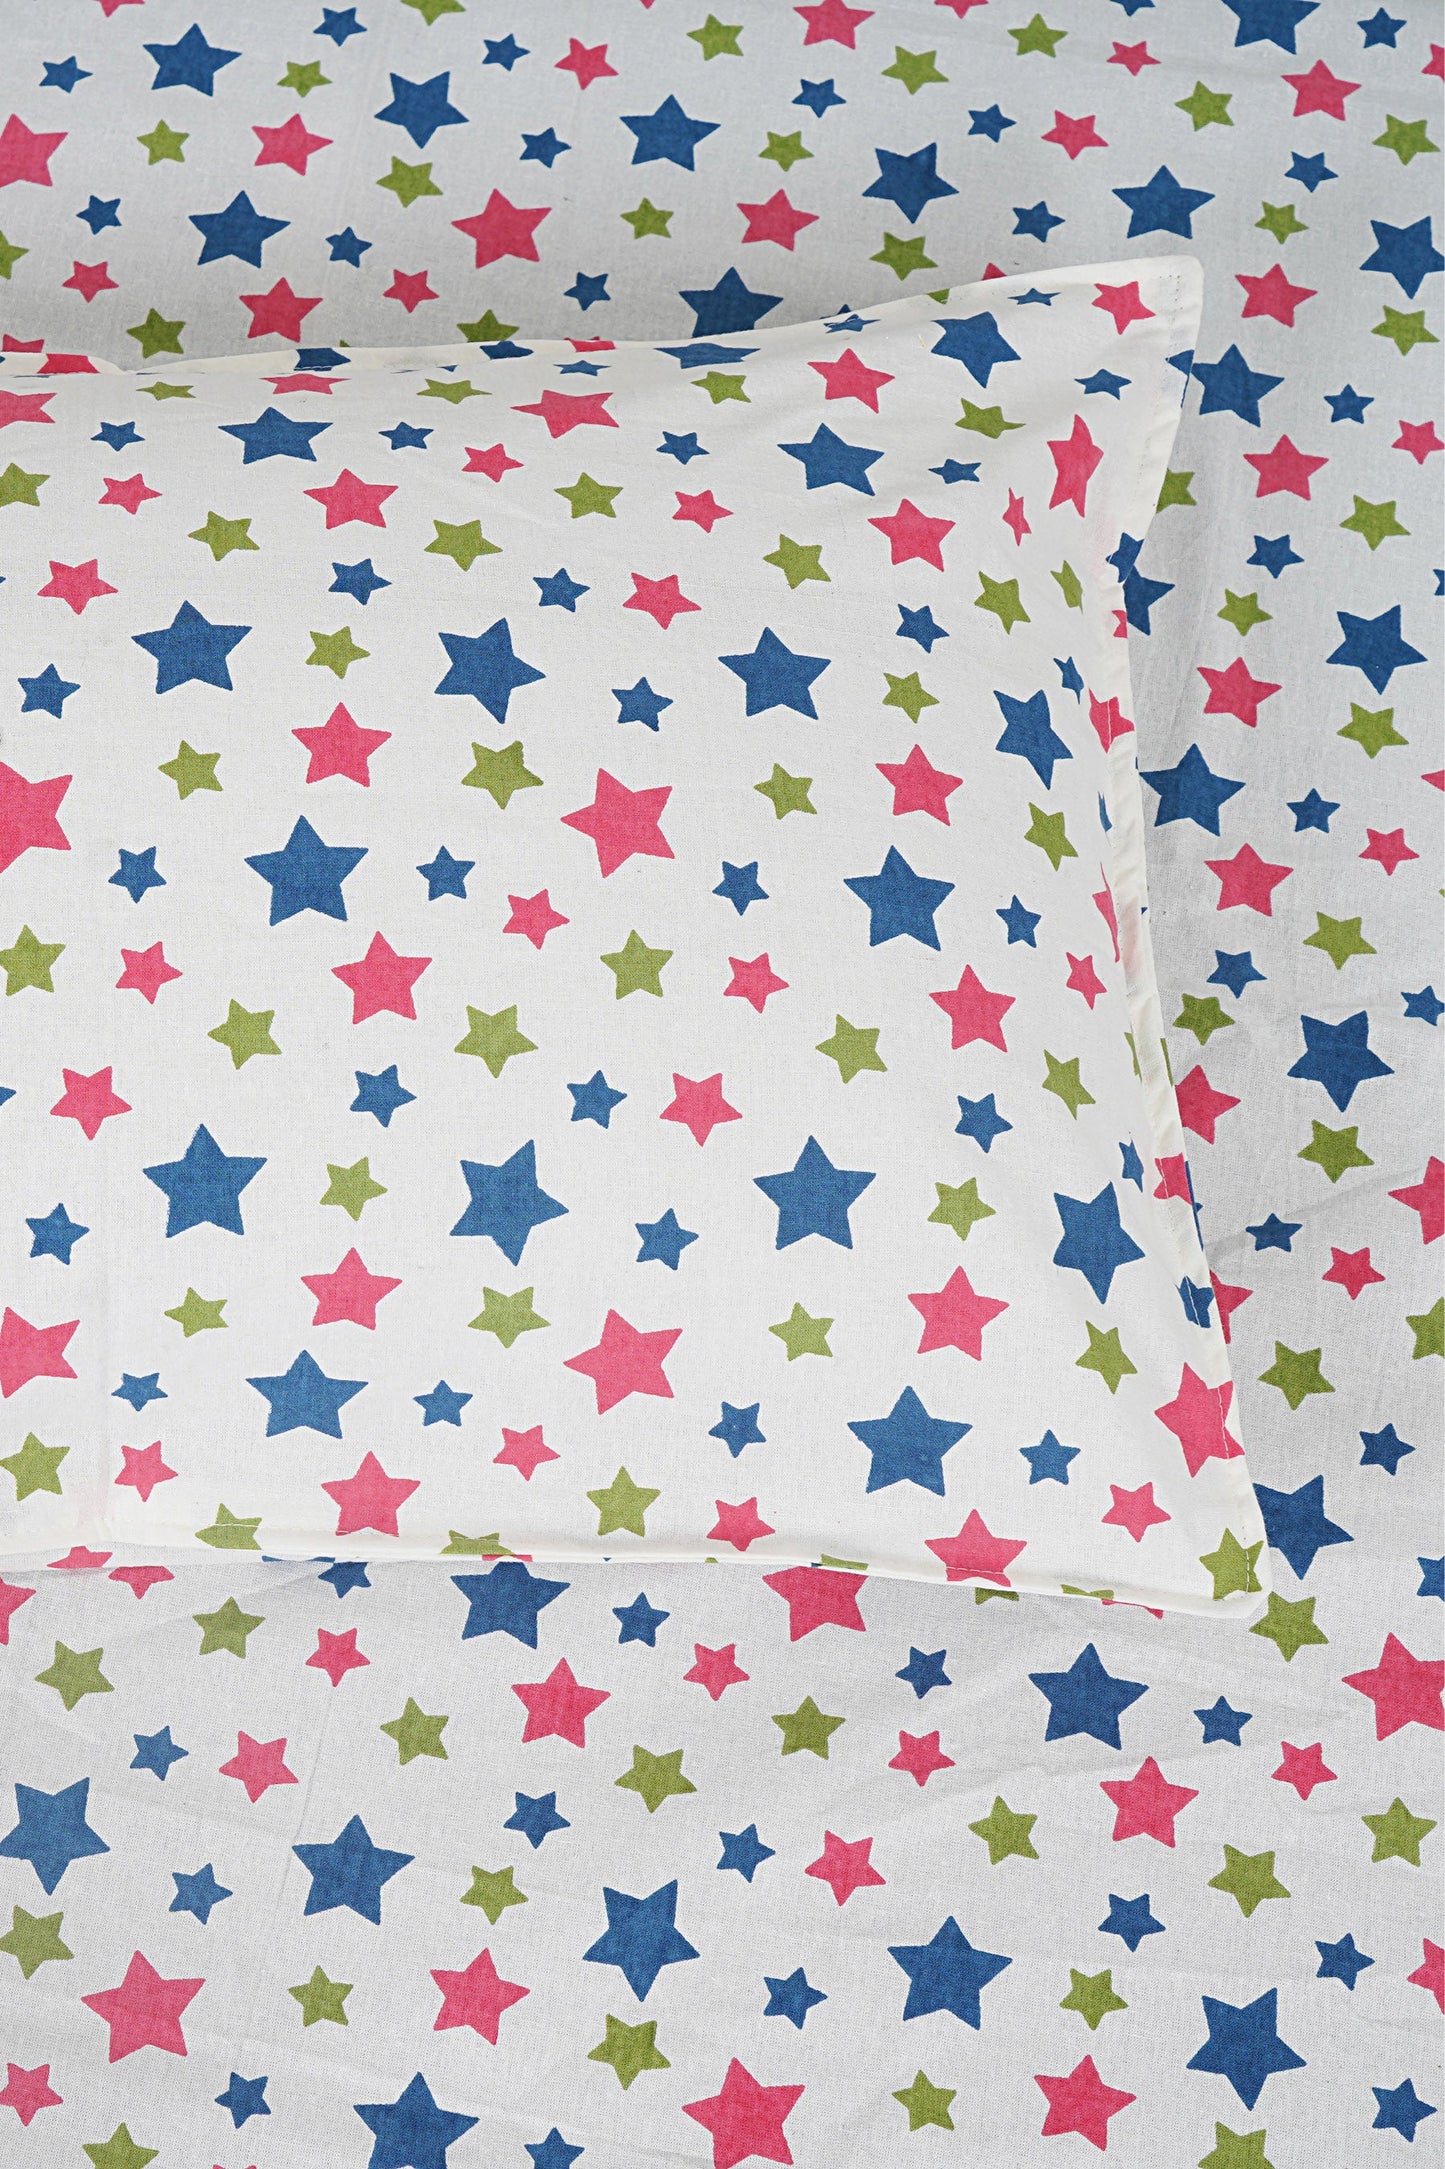 Kids Cotton Bedroom Linens - Double Sheet with 2 Pillow Covers in Red Star Print - King Size Bed